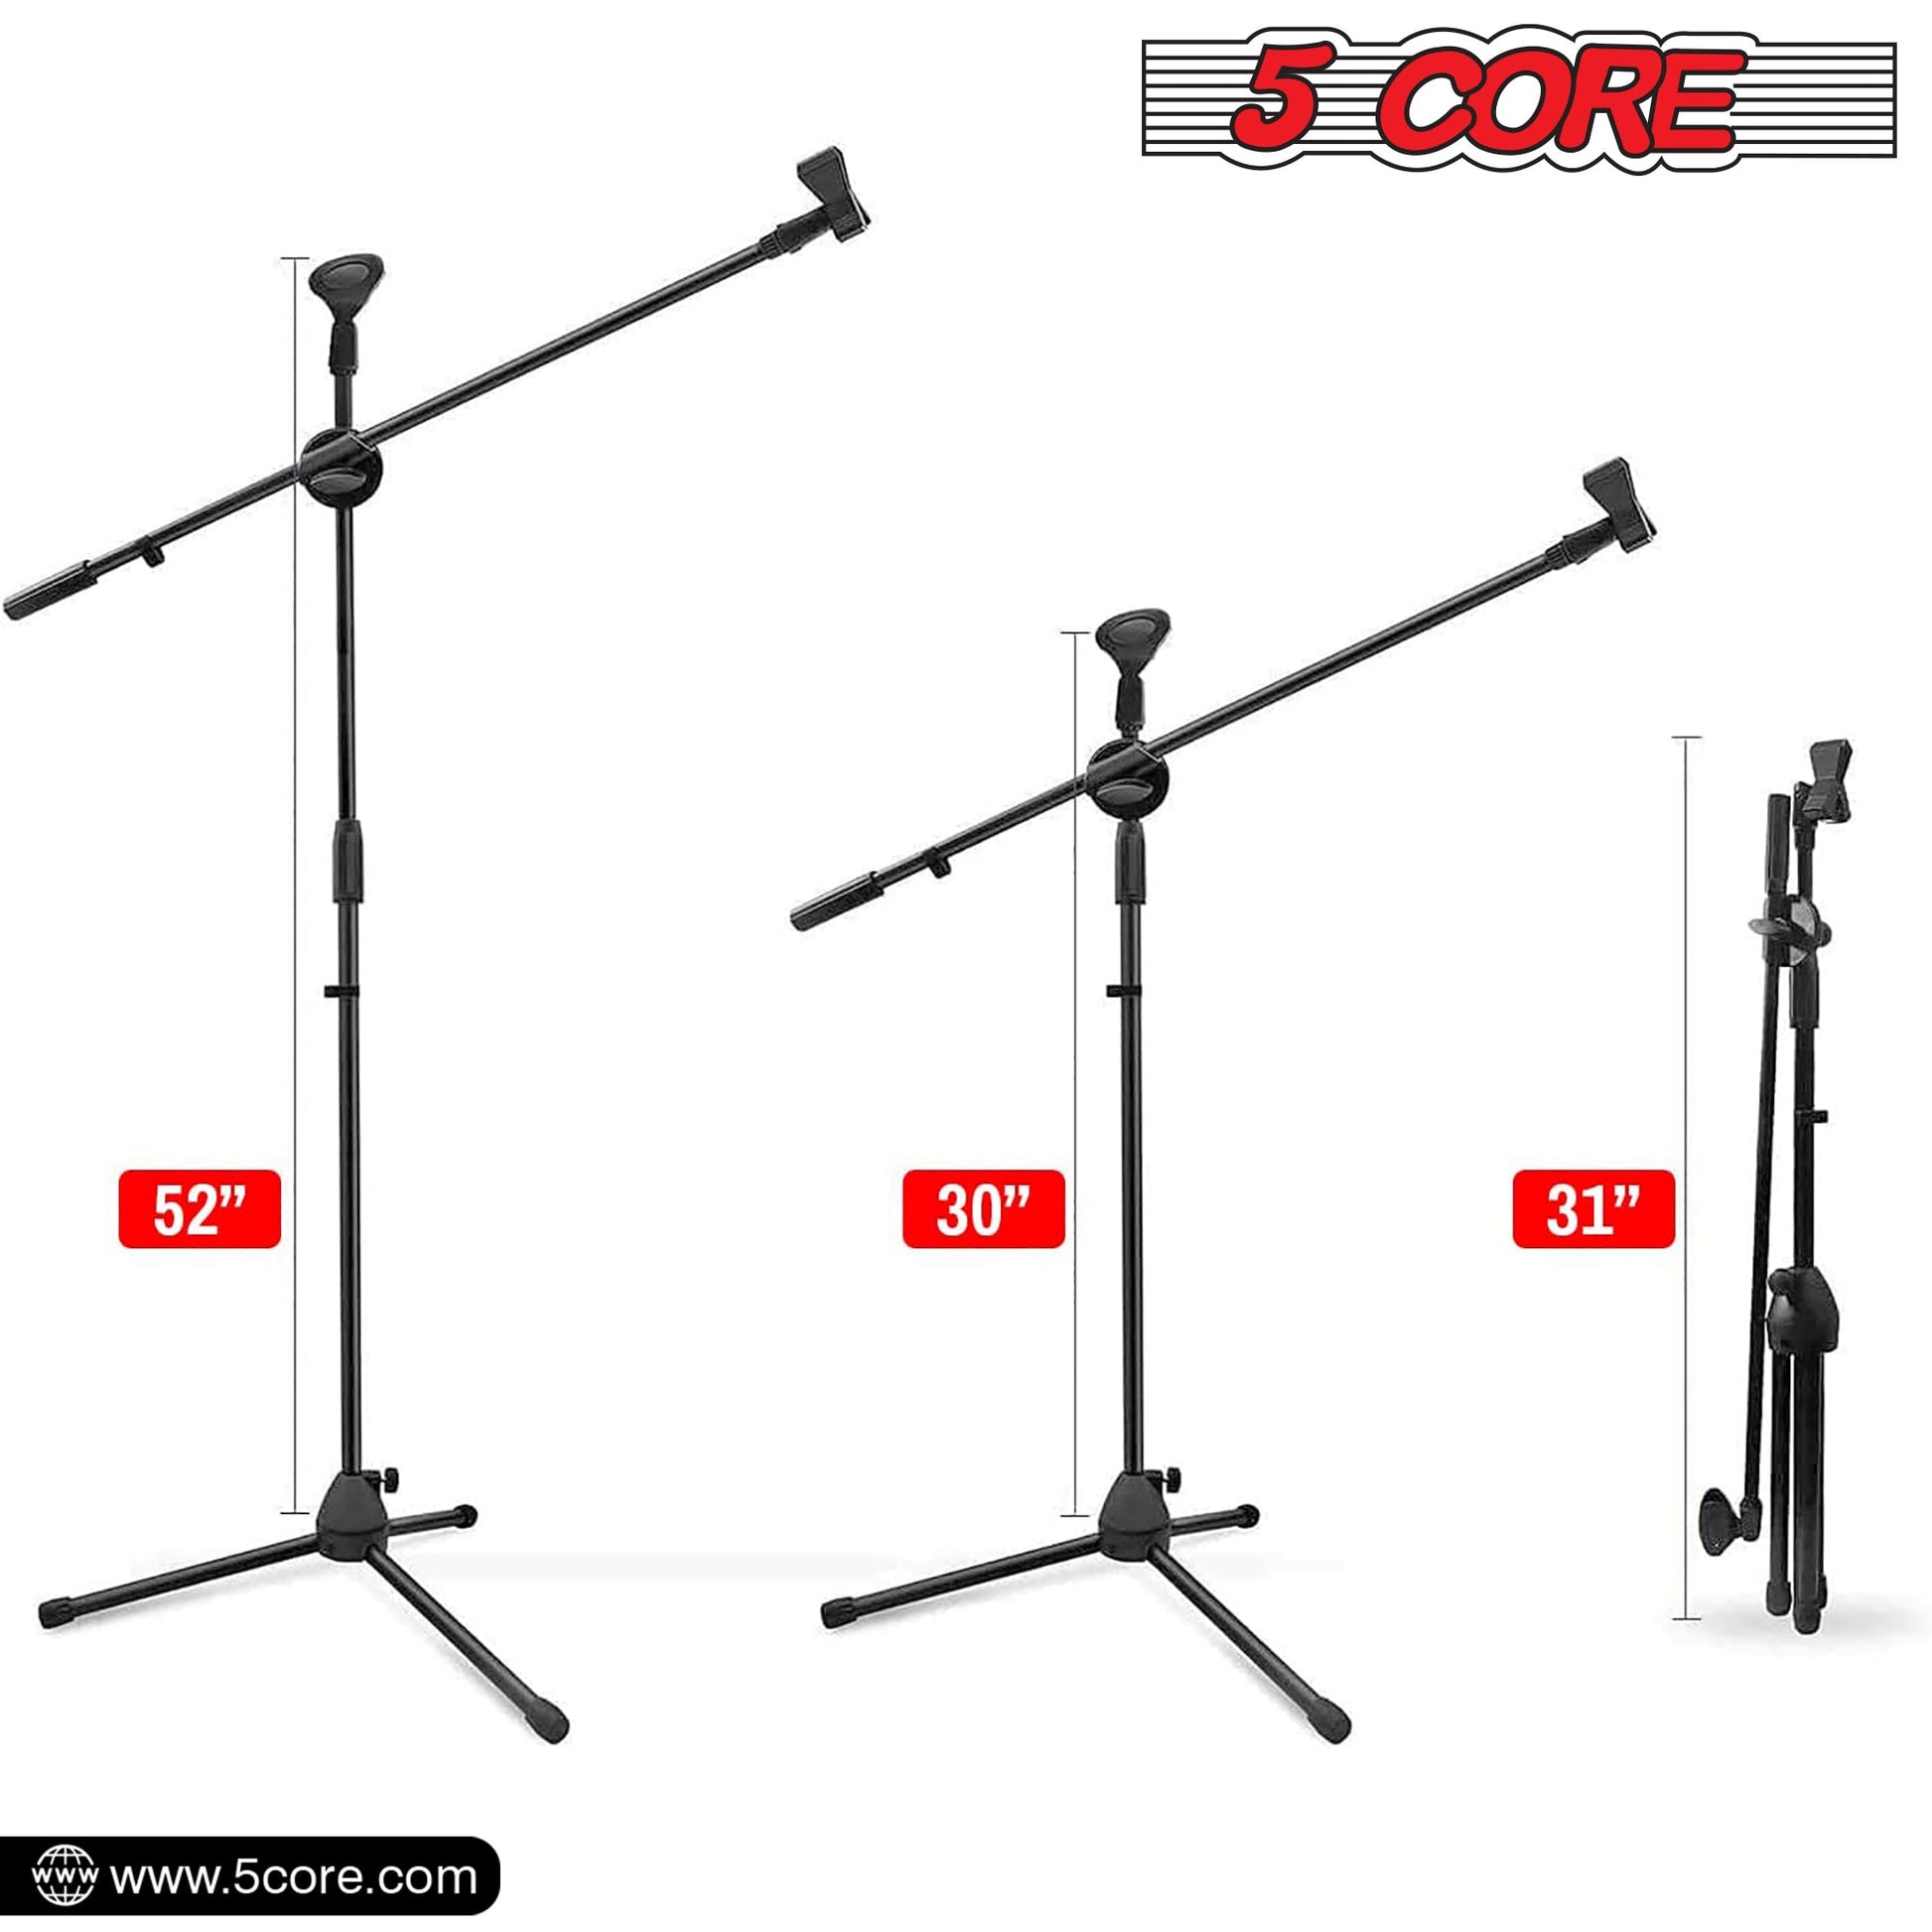 The 5 Core Premium Vocal Dynamic Cardioid Handheld Microphone and Stand combo offers high-quality audio support for karaoke singing and other activities MS DBL+ND58+ND57-3